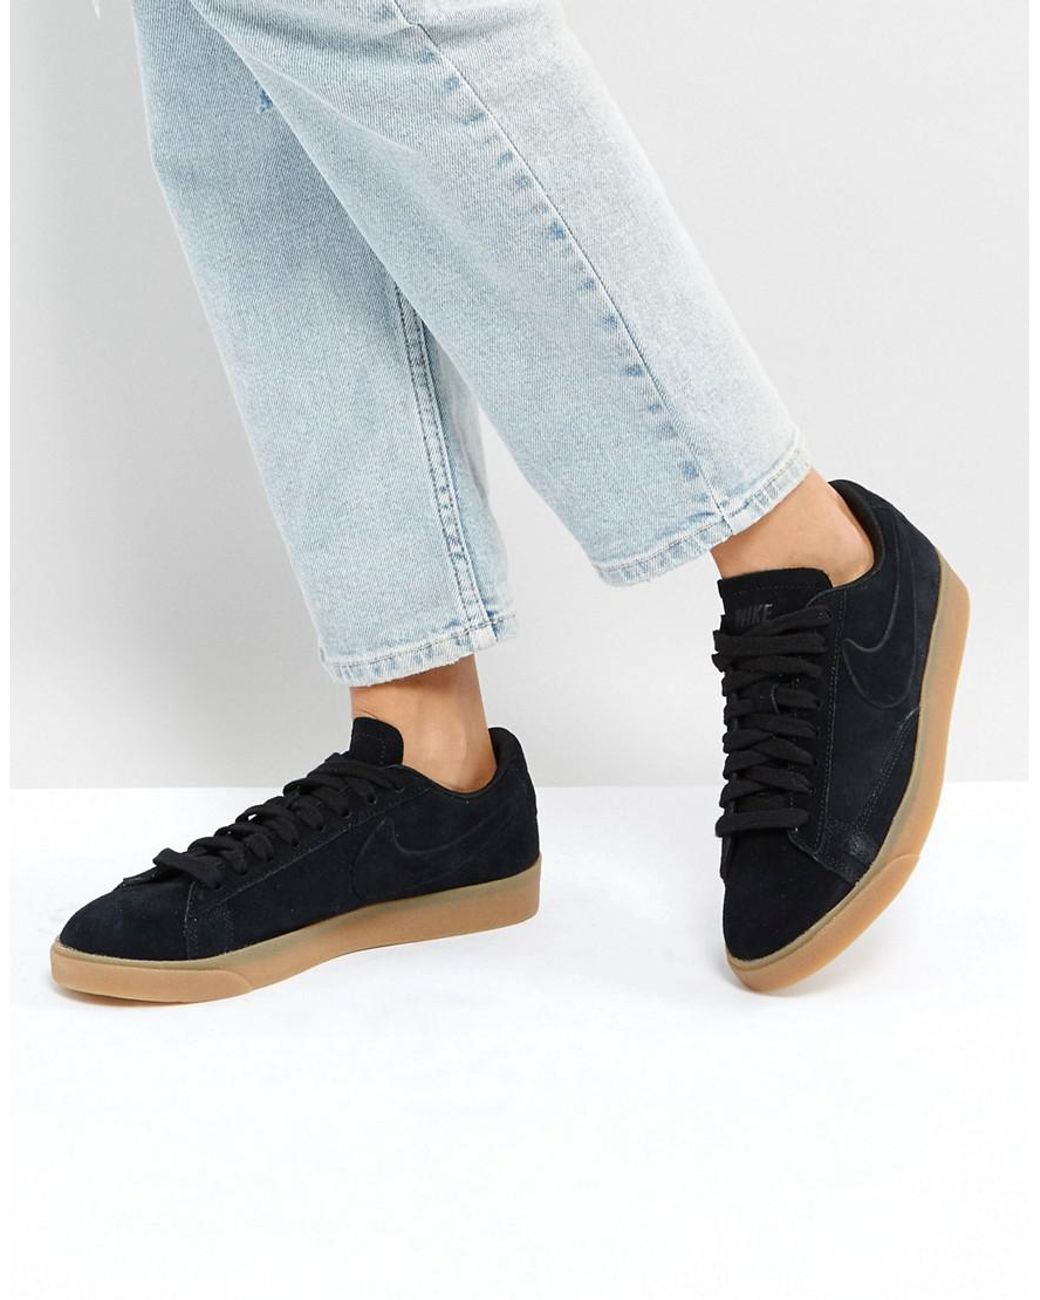 Nike Blazer Low Trainers In Black Suede With Gum Sole | Lyst Australia